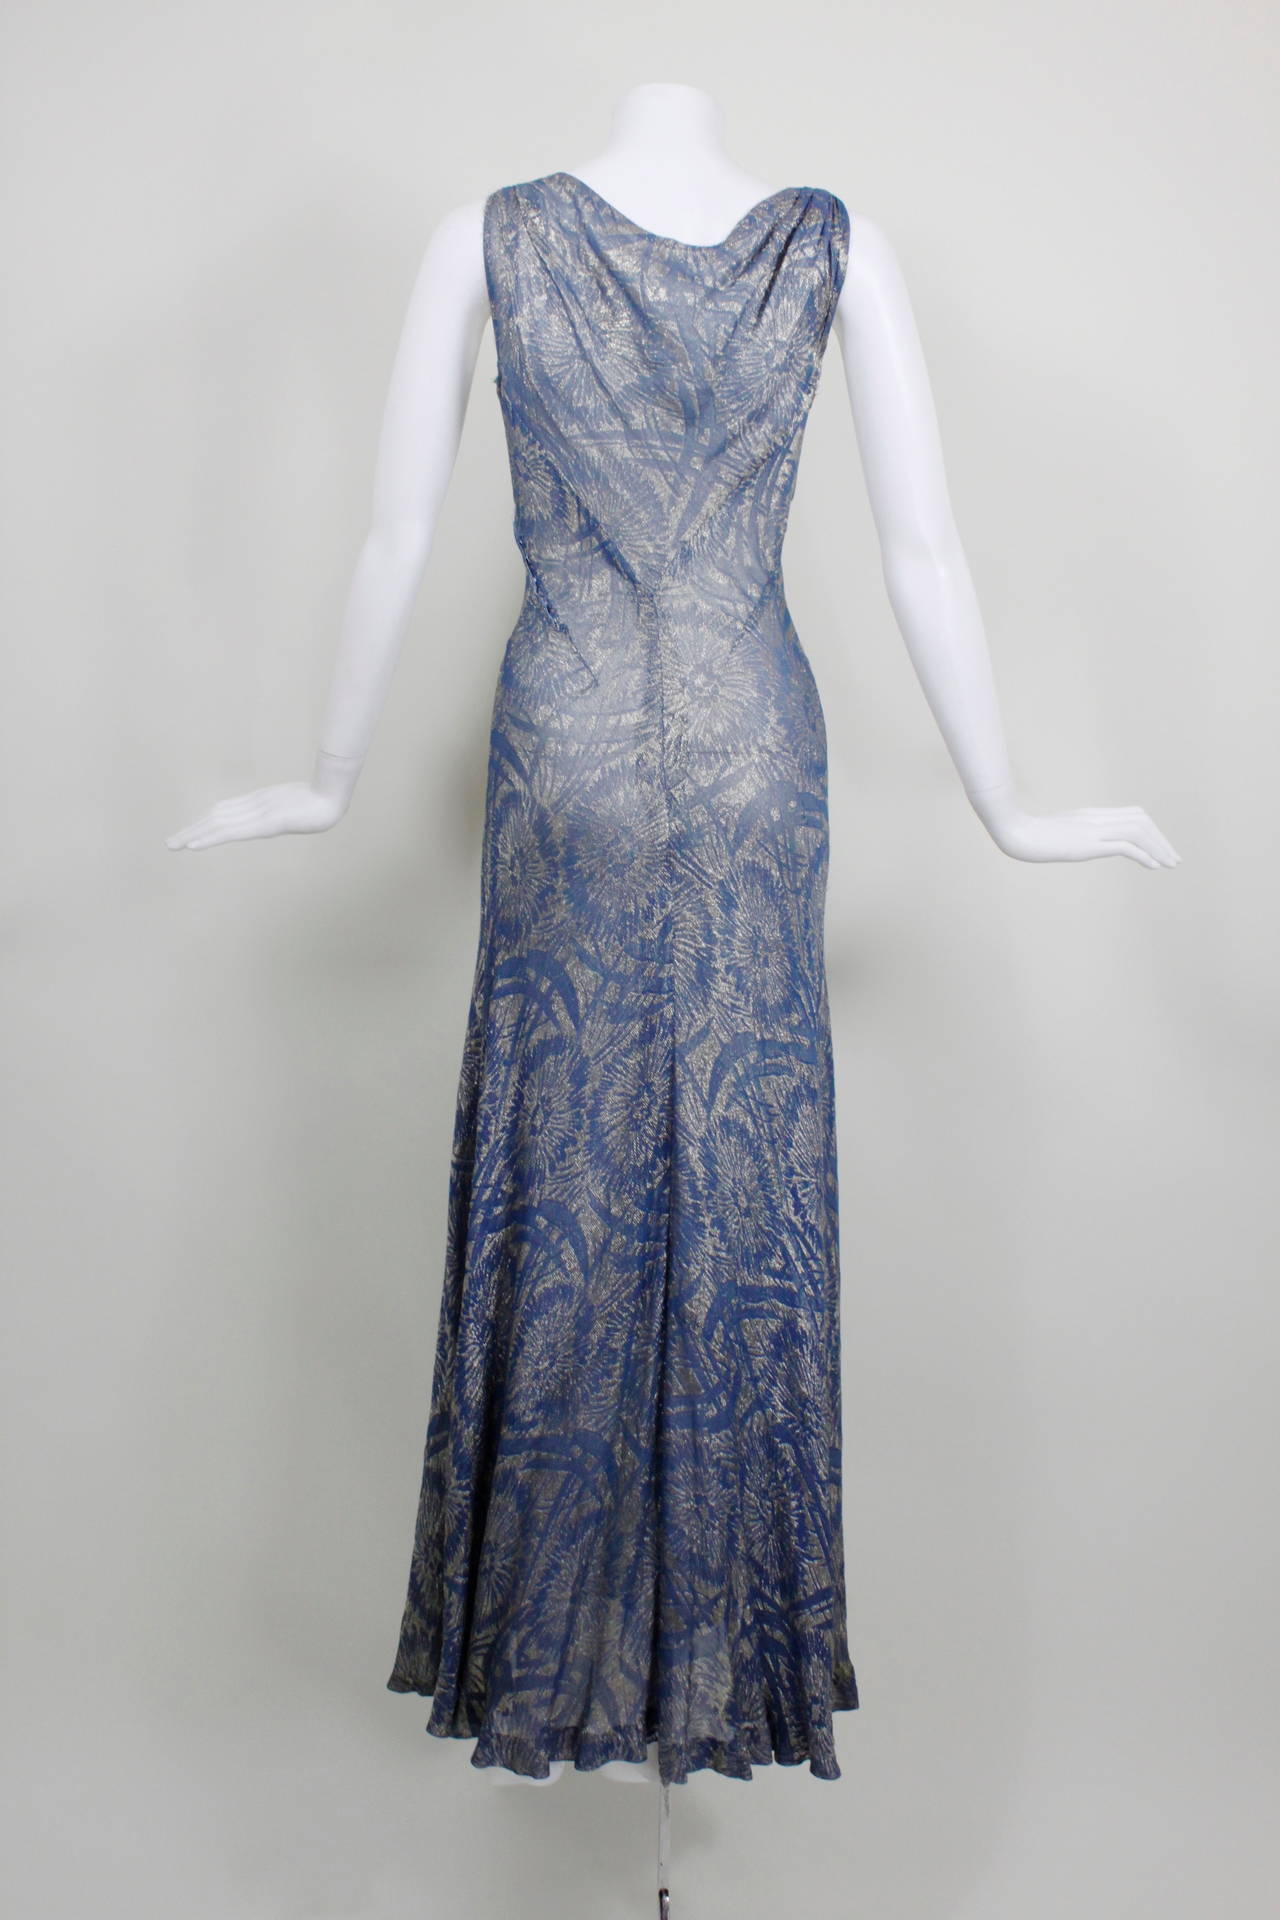 1930s Blue Floral Lamé Evening Gown with Peplum Jacket In Excellent Condition For Sale In Los Angeles, CA